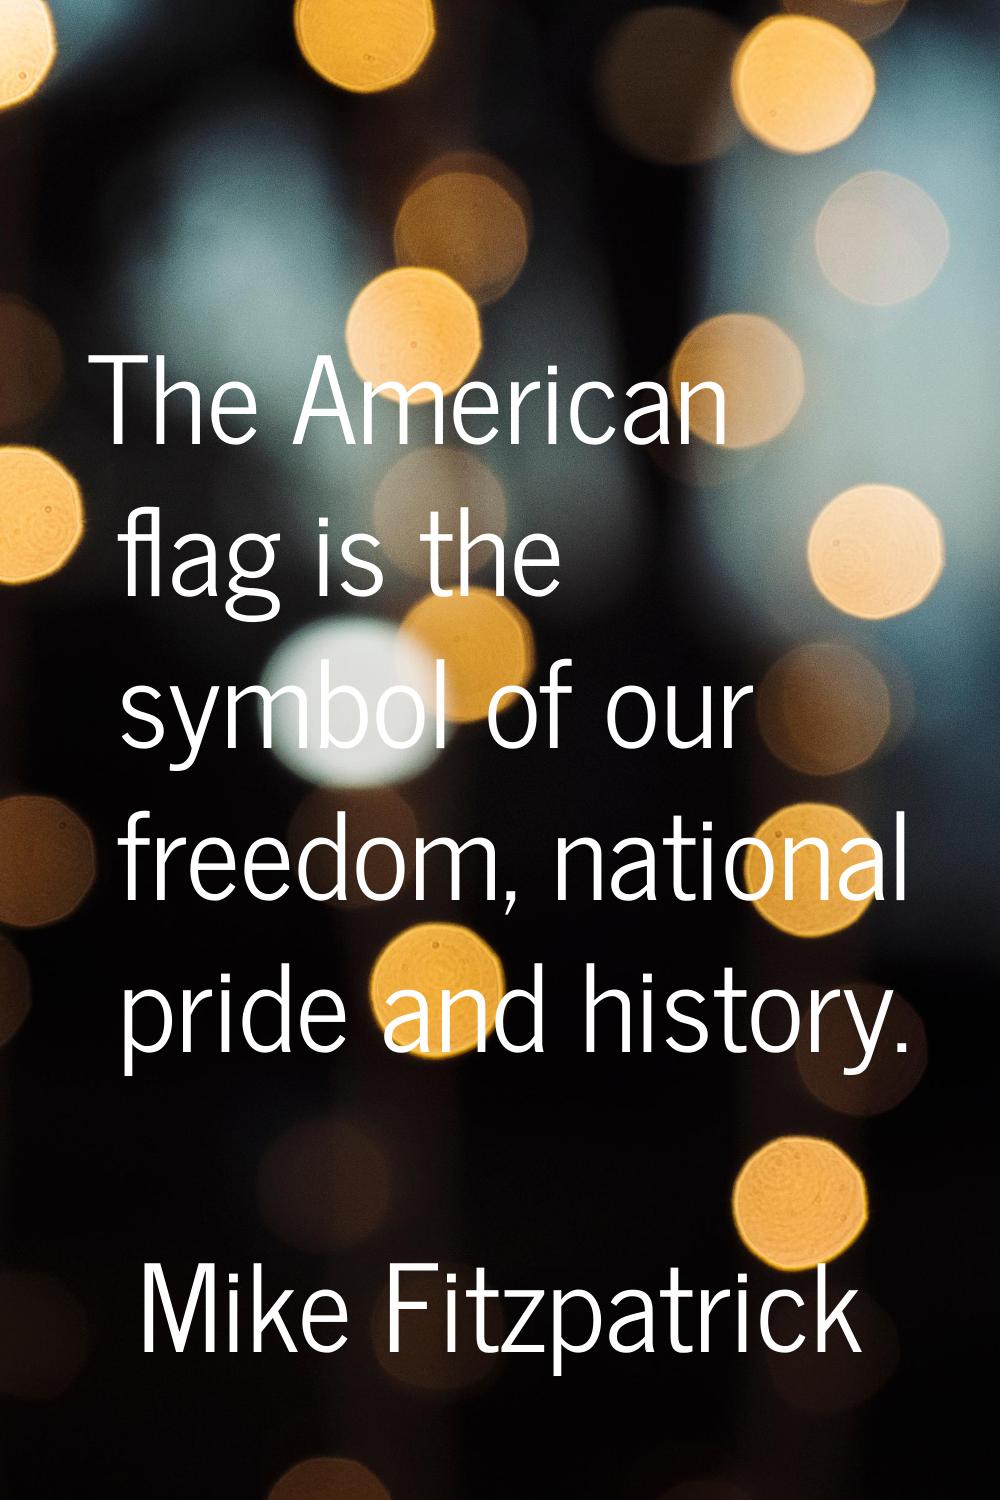 The American flag is the symbol of our freedom, national pride and history.